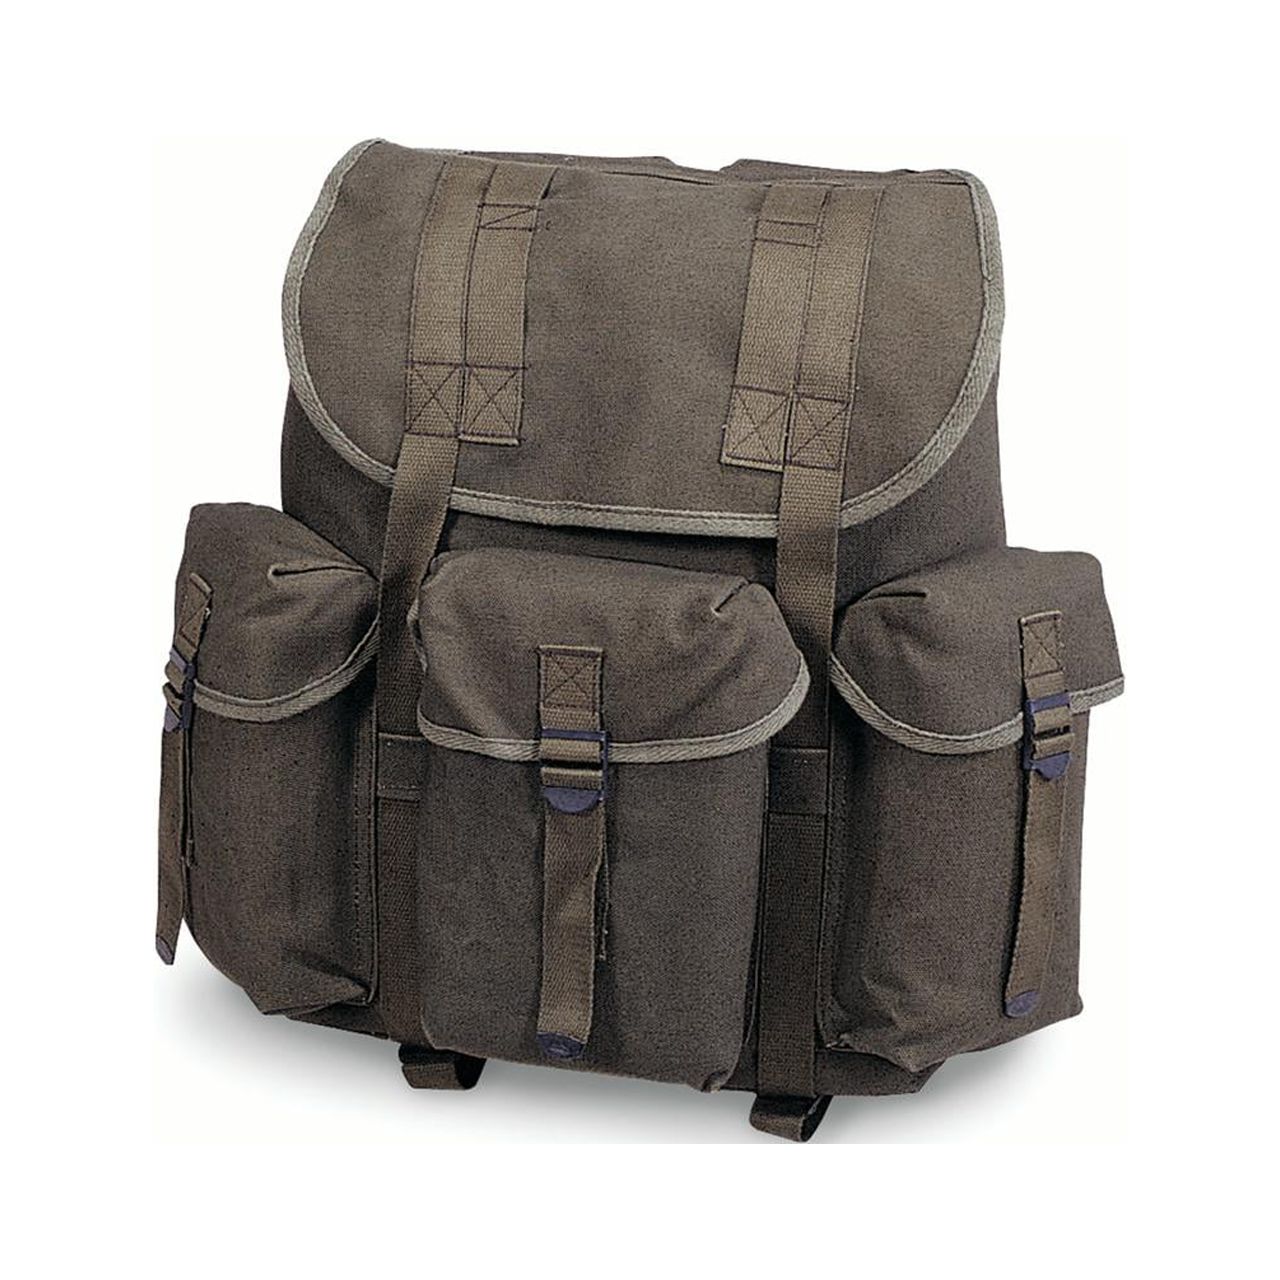 Stansport Heavy Weight Cotton Canvas G.I. Rucksack - image 1 of 1